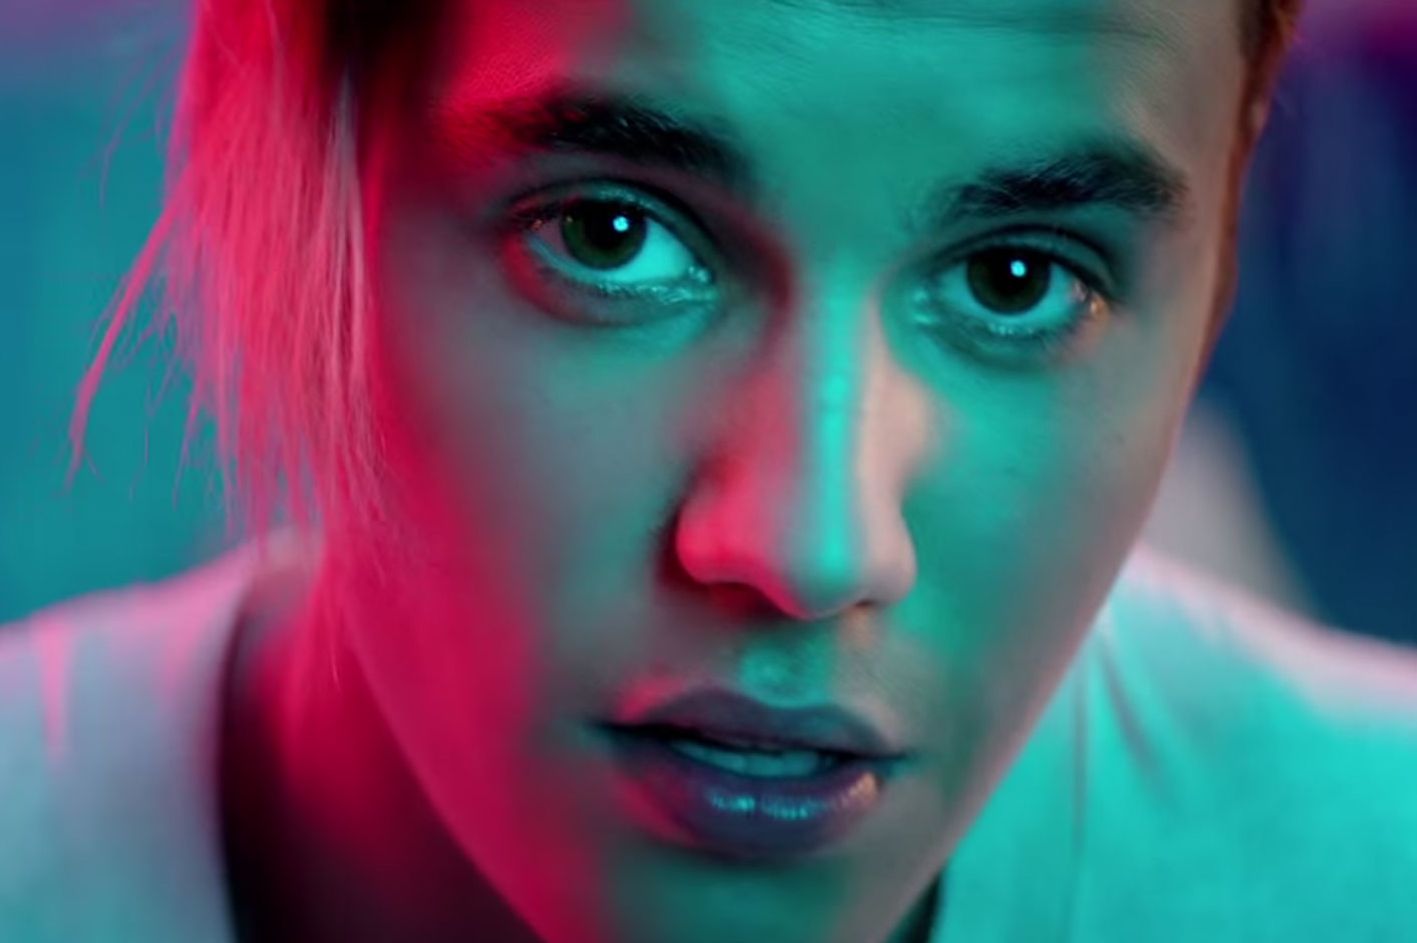 What do you mean. Джастин Бибер 2015 what do you mean. Justin Bieber what do. Бибер вот Ду ю мин. Justin Bieber what do you mean.